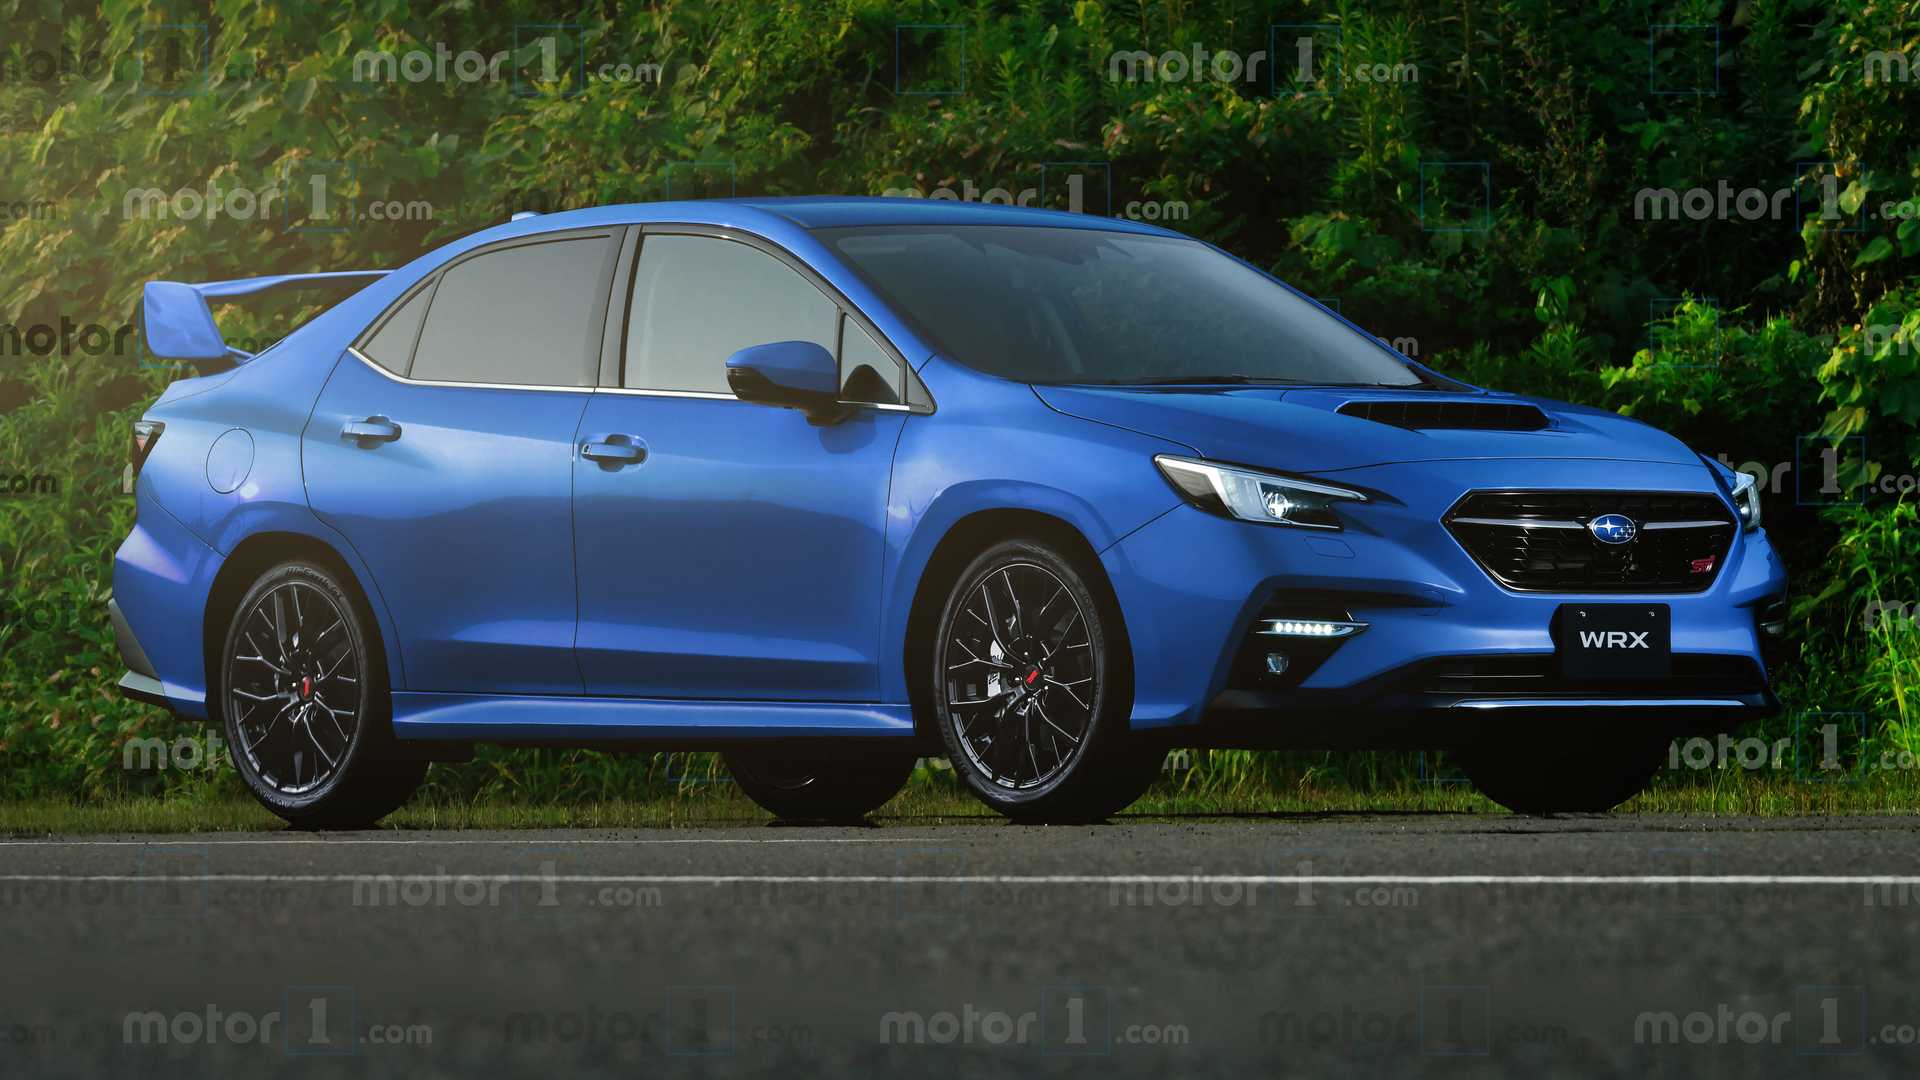 2022 Subaru WRX: Here's What It Could Look Like